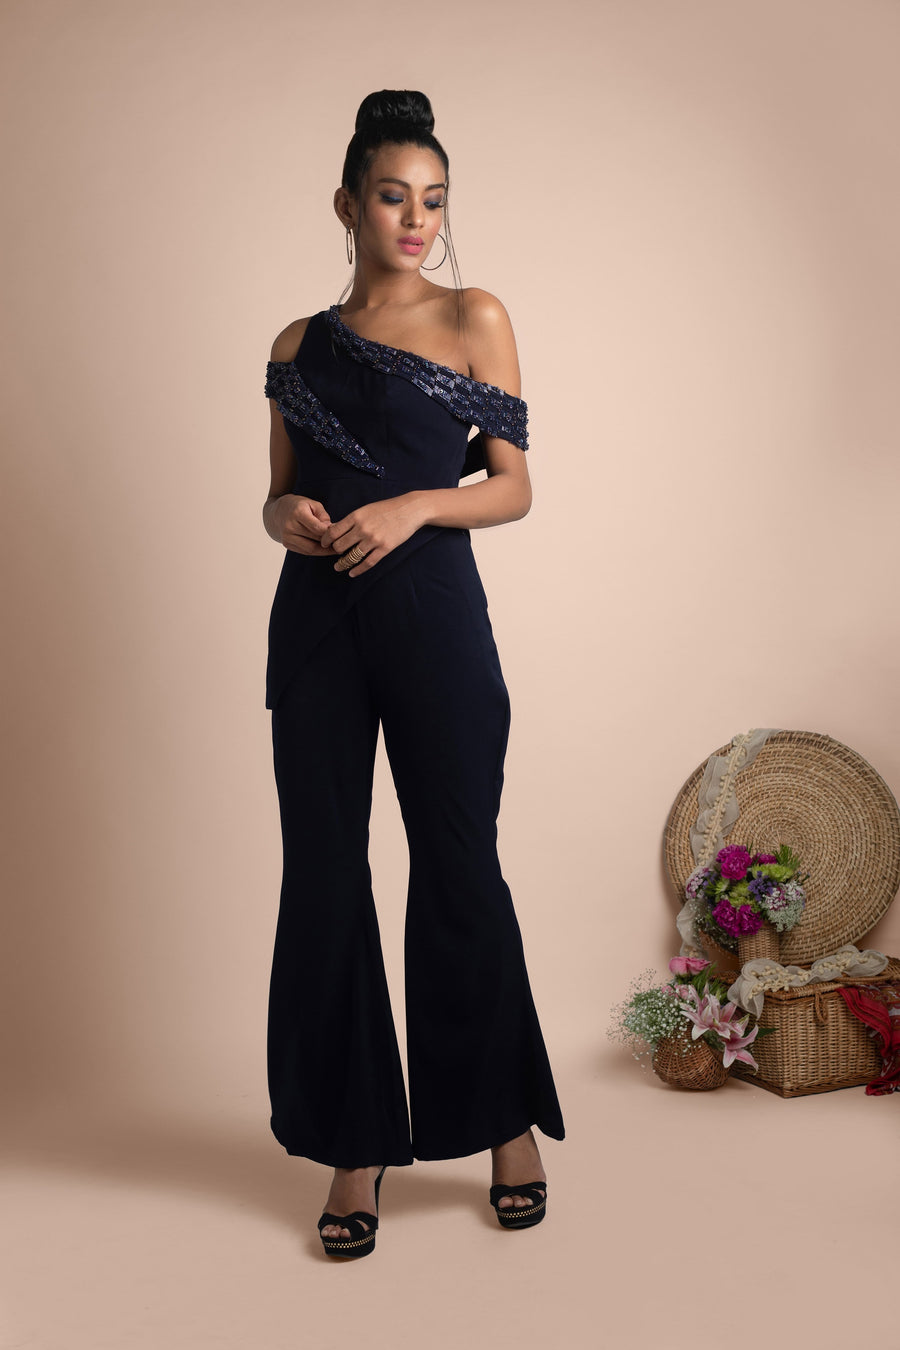 Mehak Murpana| Jacket Top & Bell Bottoms | Stylish formal and party wear.